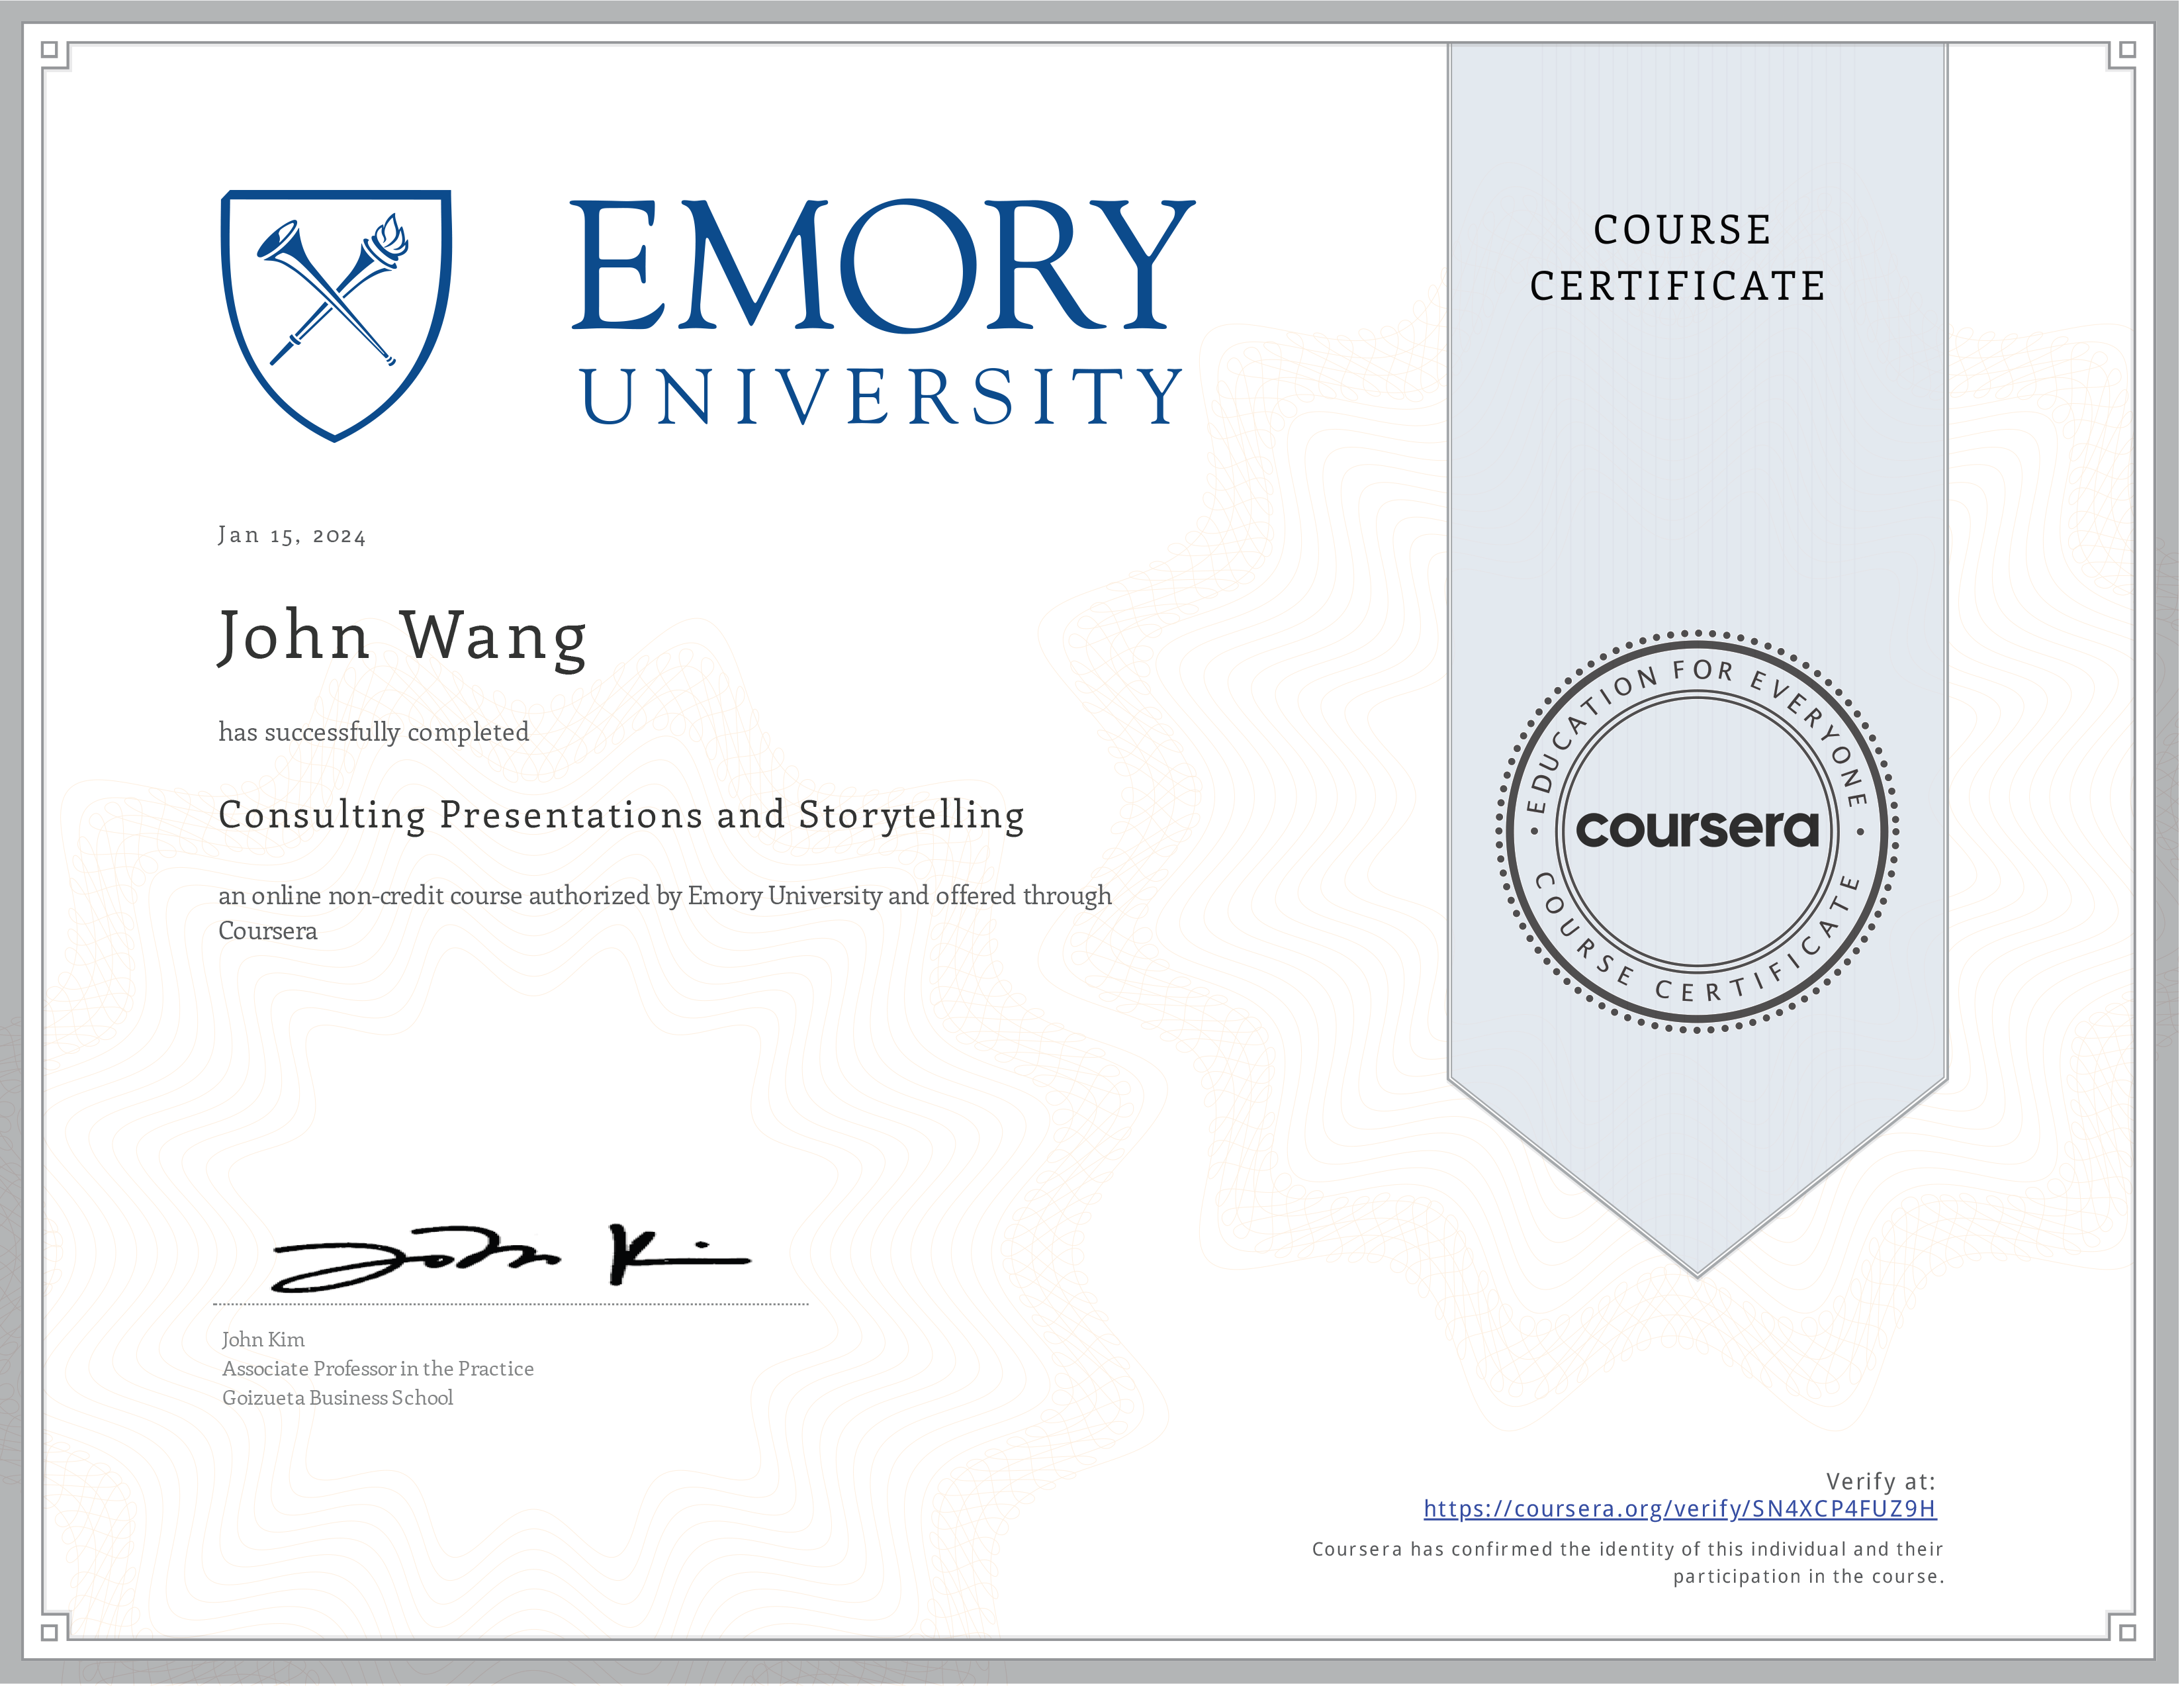 John's Consulting Presentations and Storytelling from Emory University by John Kim